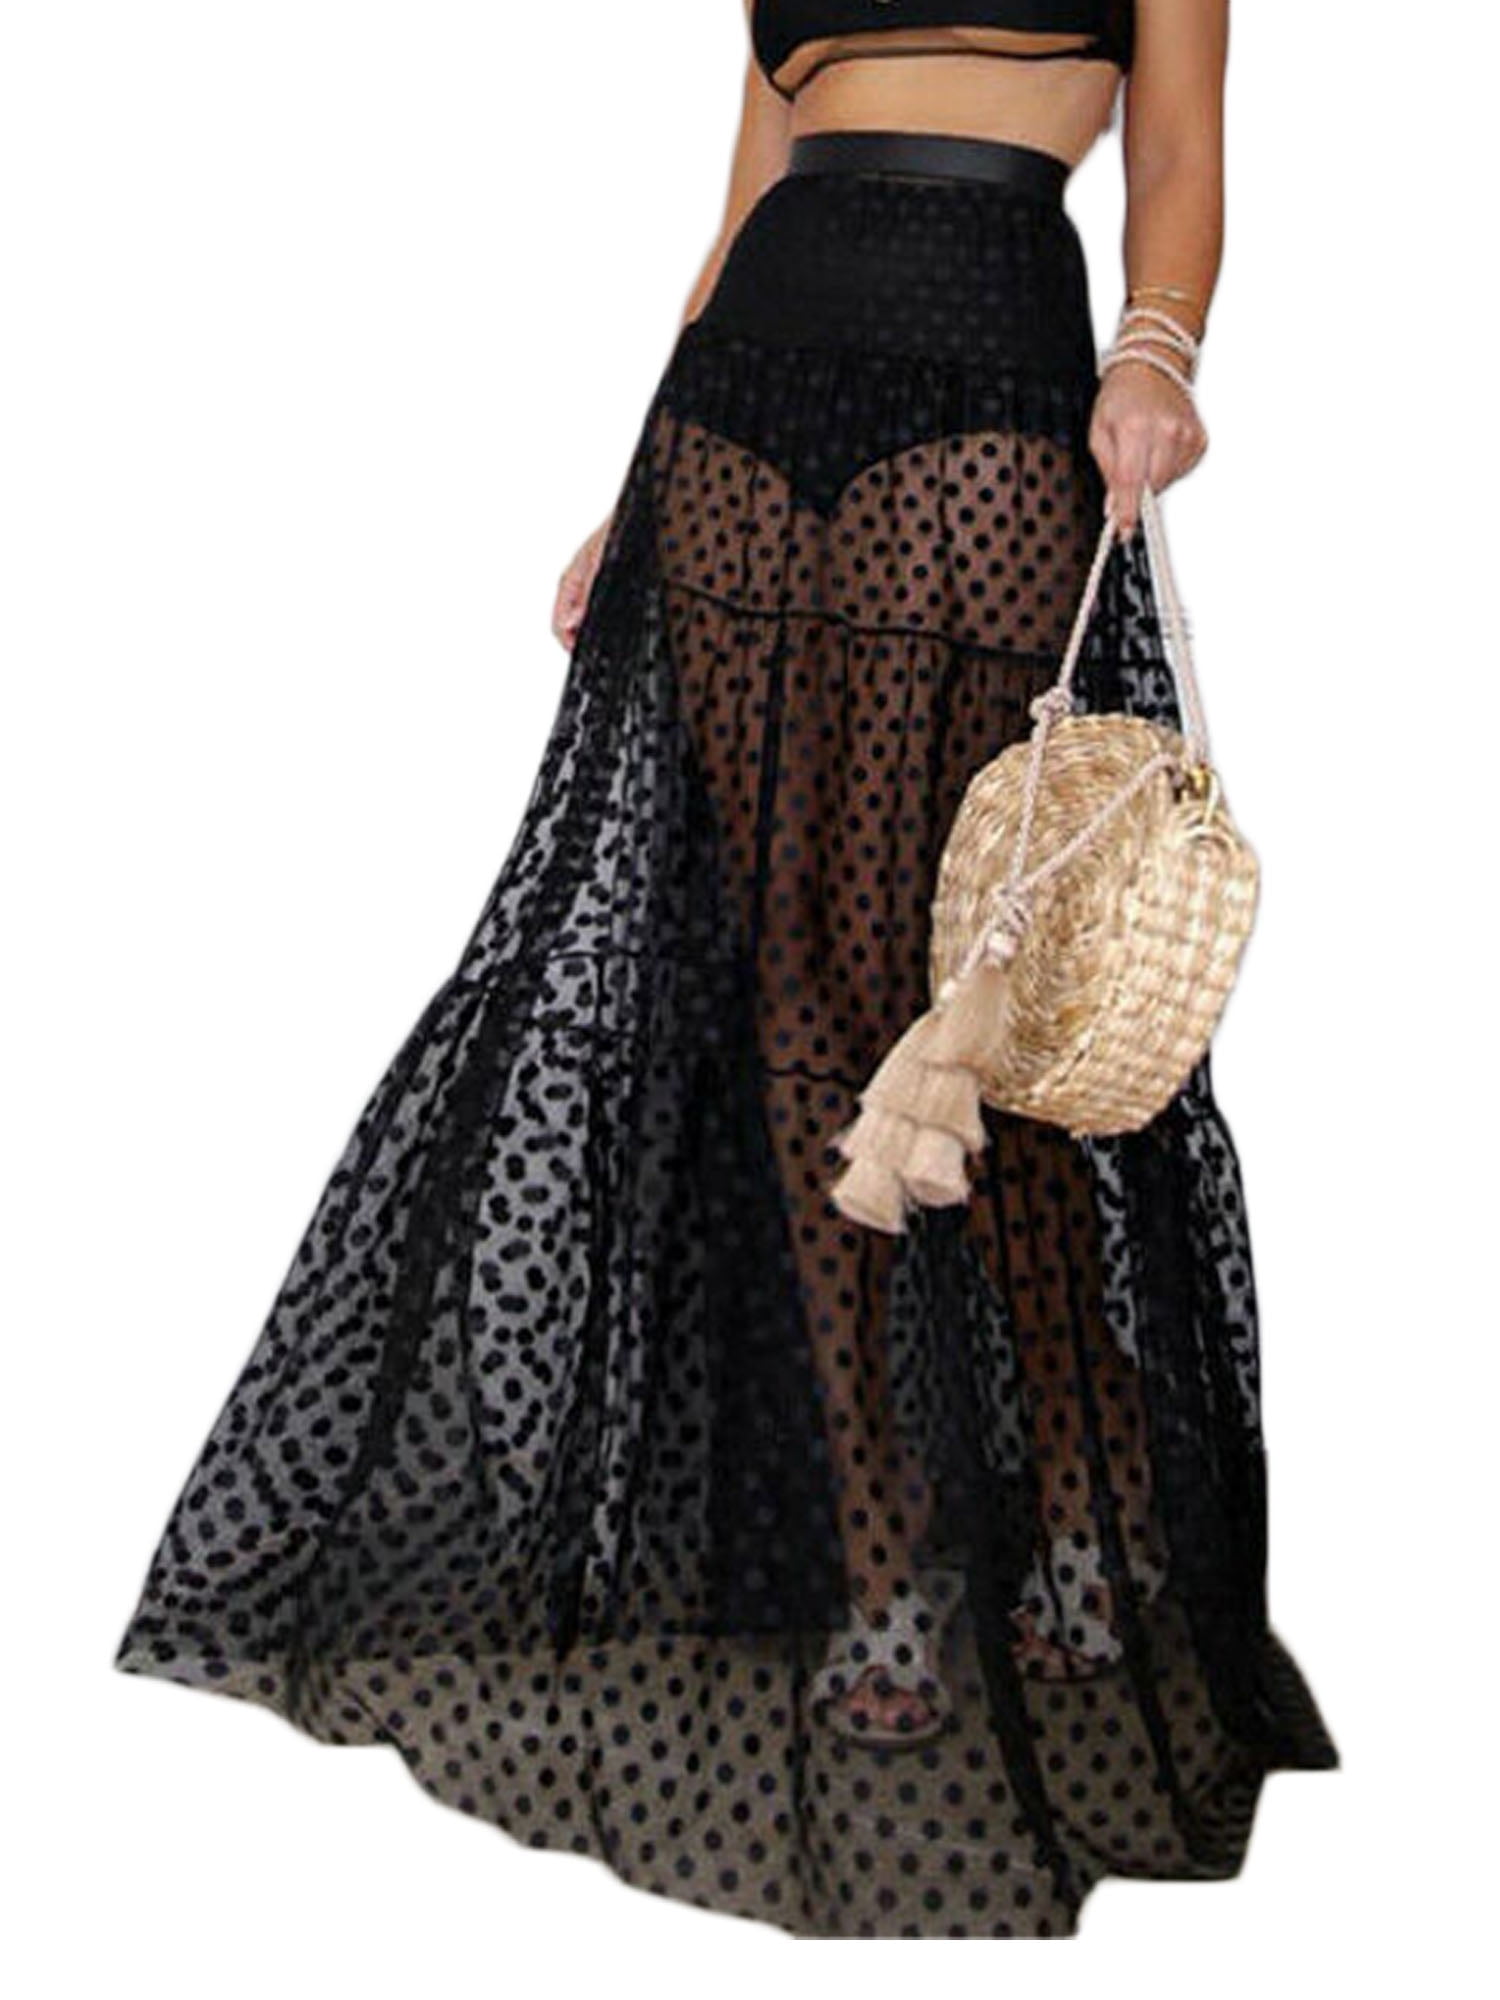 Details about   Women Mesh One Piece Skirt Lace Sheer Wrap Sarong Beach Tulle Transparent White